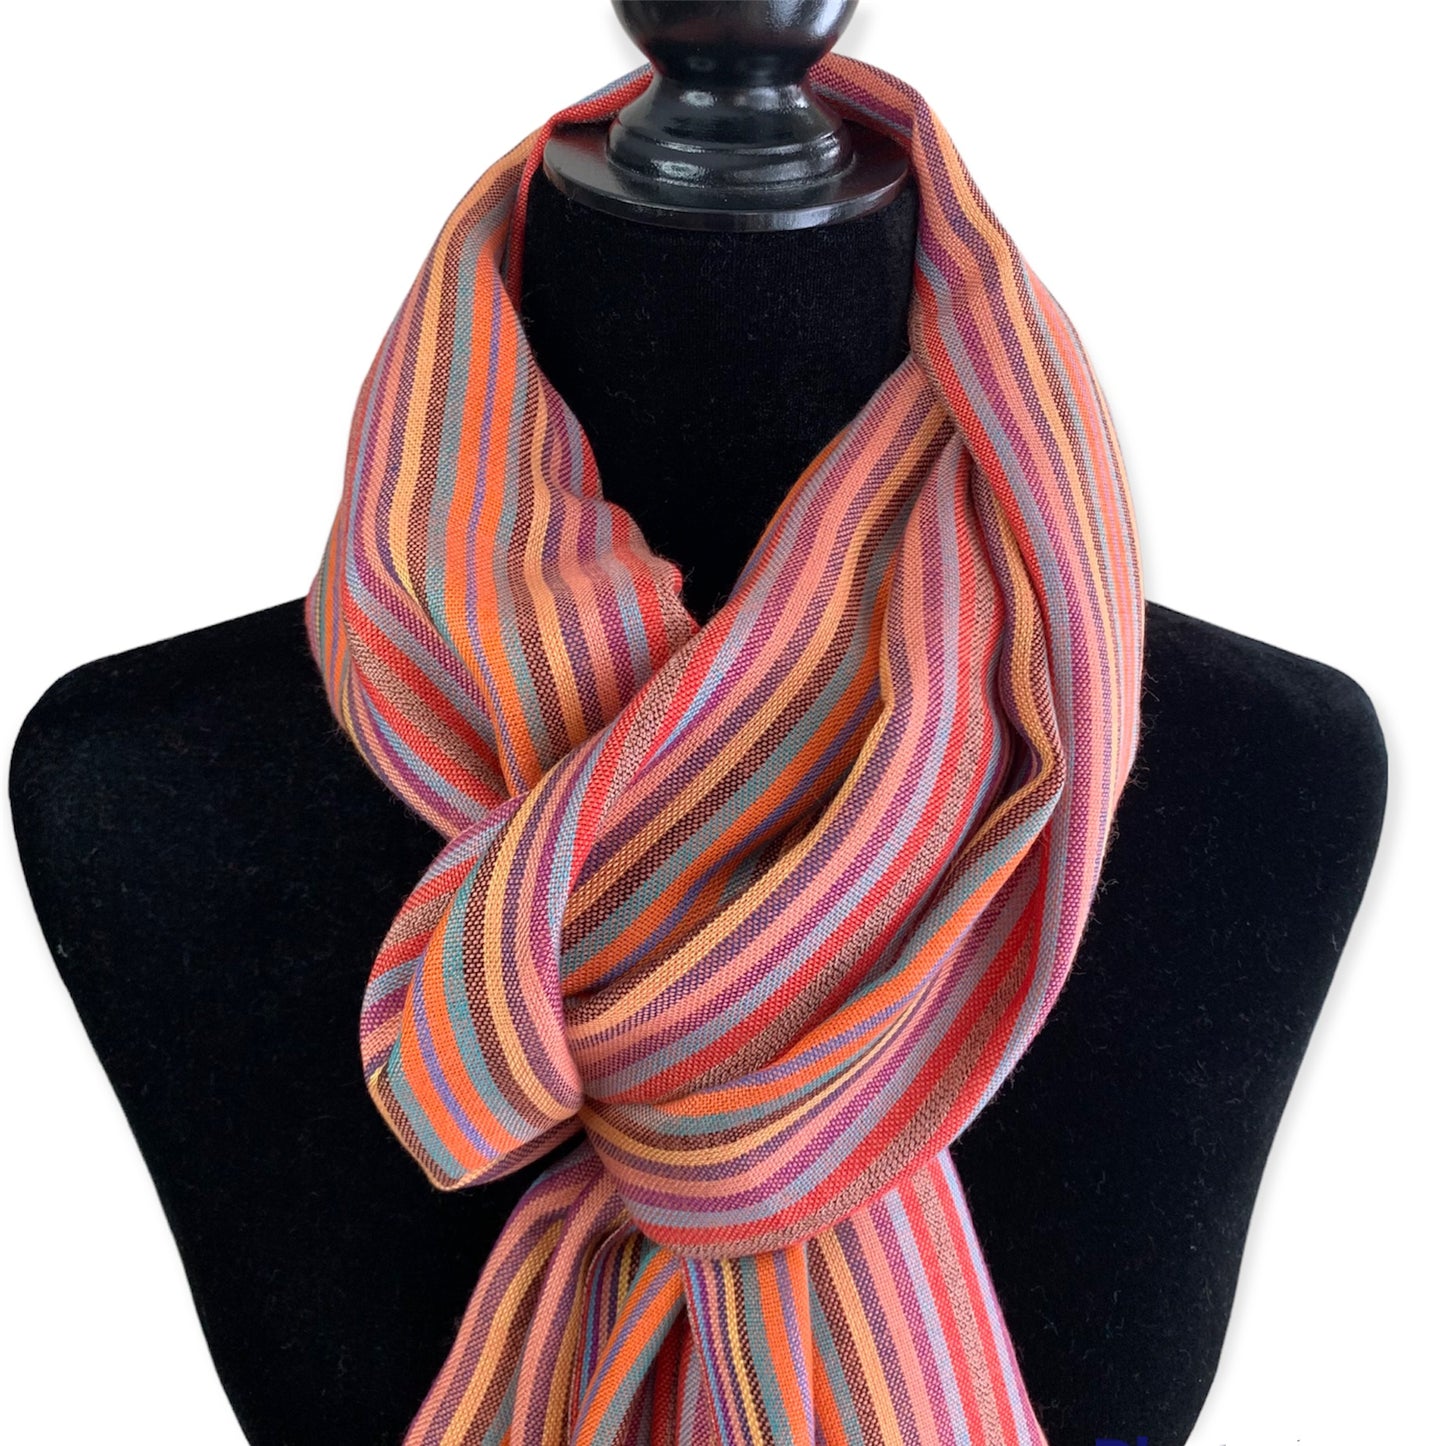 Thin Striped Handwoven Bamboo Viscose Scarf - Shades of Peach